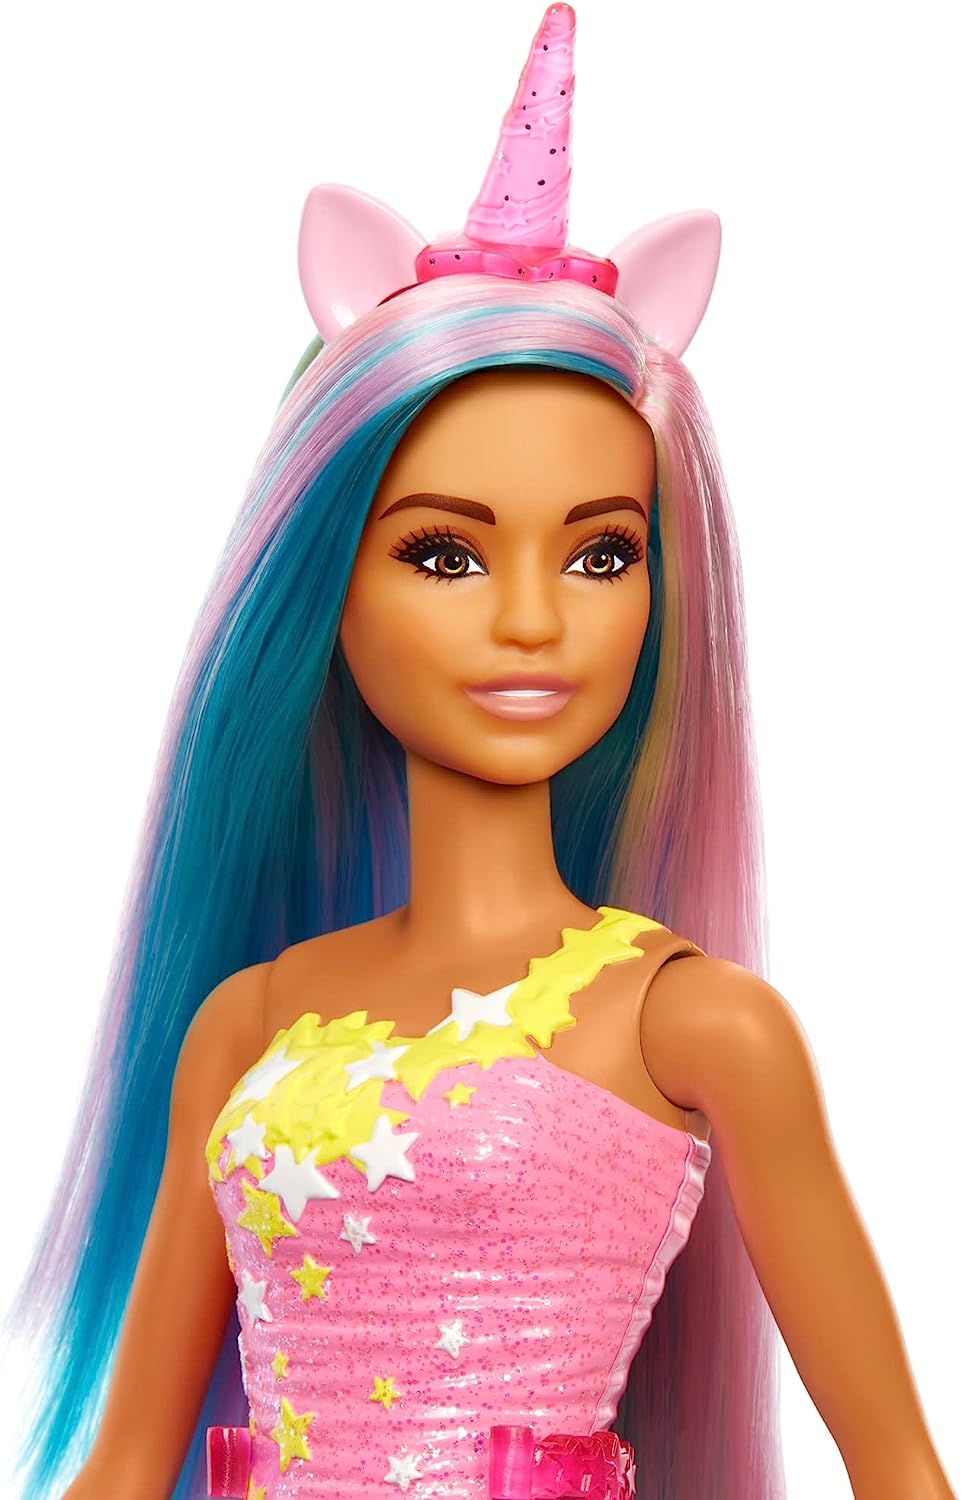 Barbie Dreamtopia Unicorn Doll (Blue & Pink Hair), With Skirt, Removable Unicorn Tail & Headband